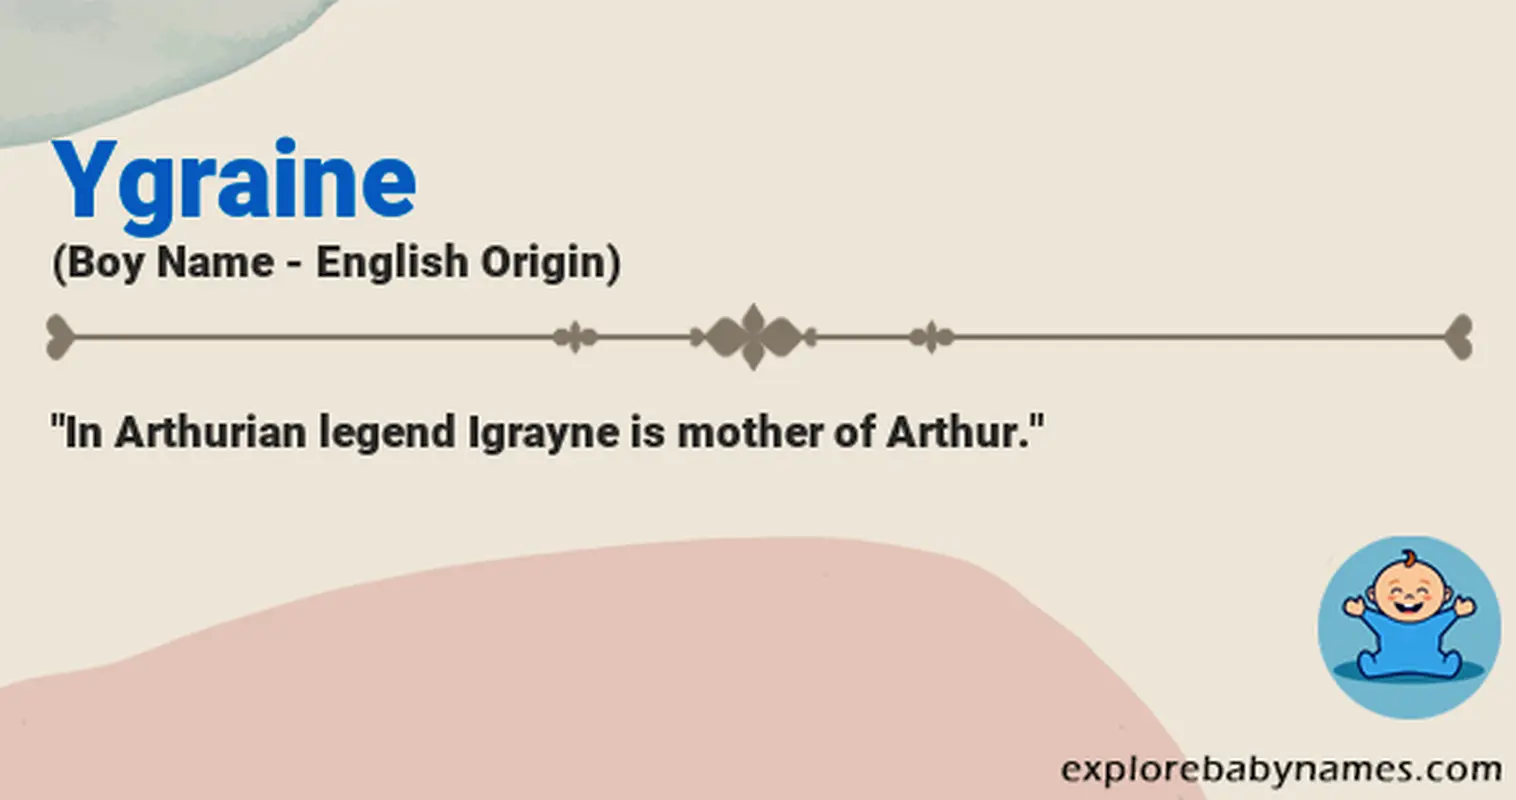 Meaning of Ygraine